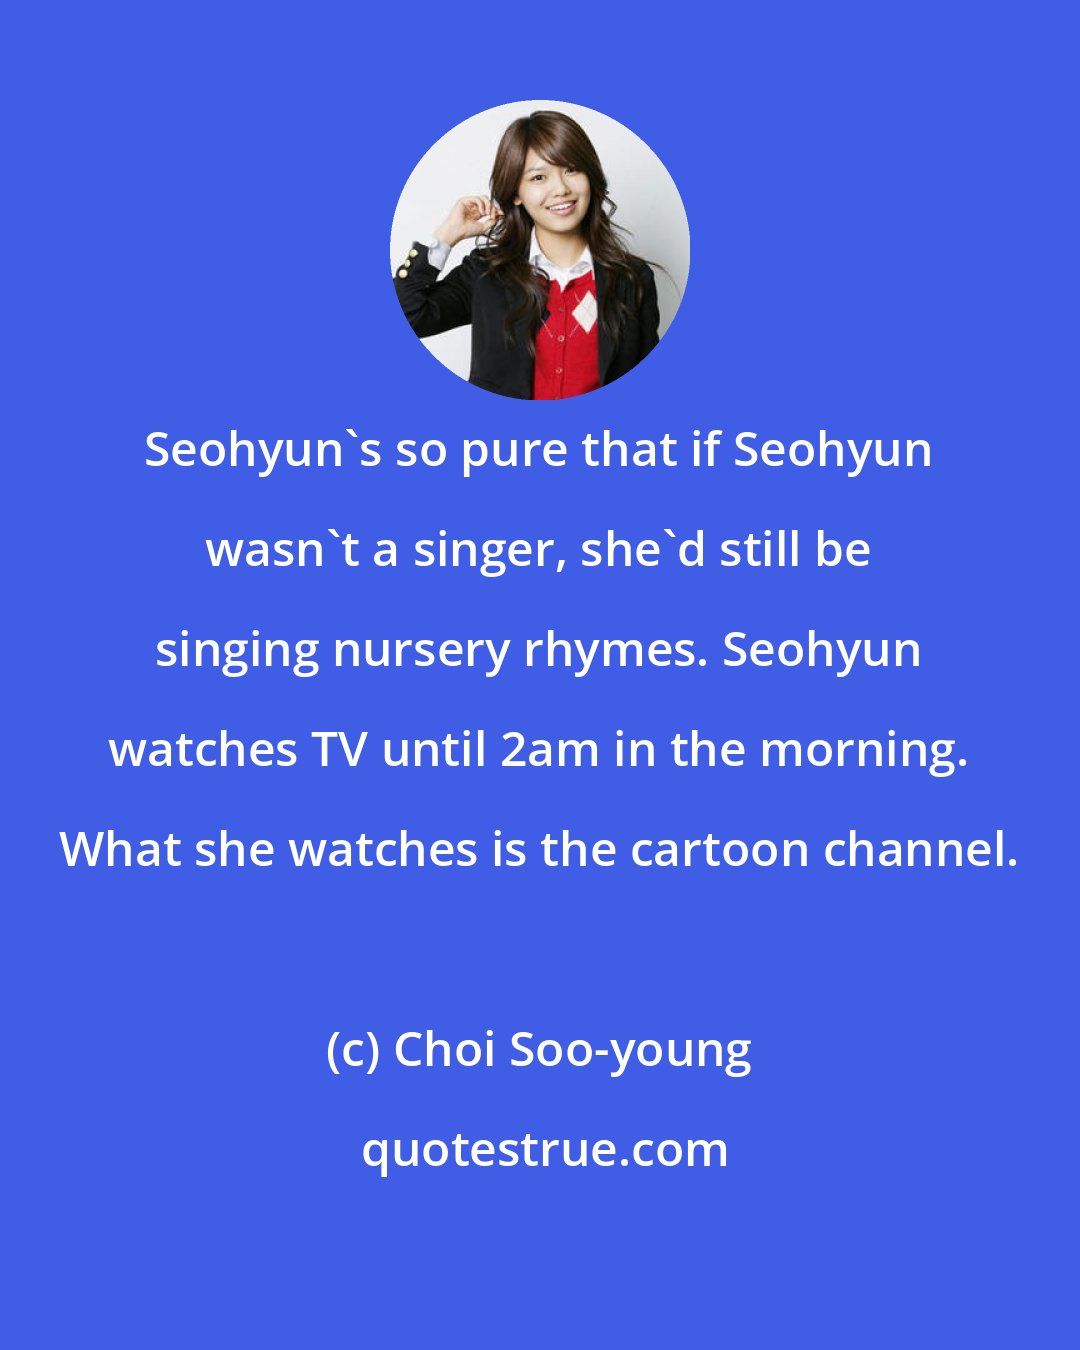 Choi Soo-young: Seohyun's so pure that if Seohyun wasn't a singer, she'd still be singing nursery rhymes. Seohyun watches TV until 2am in the morning. What she watches is the cartoon channel.